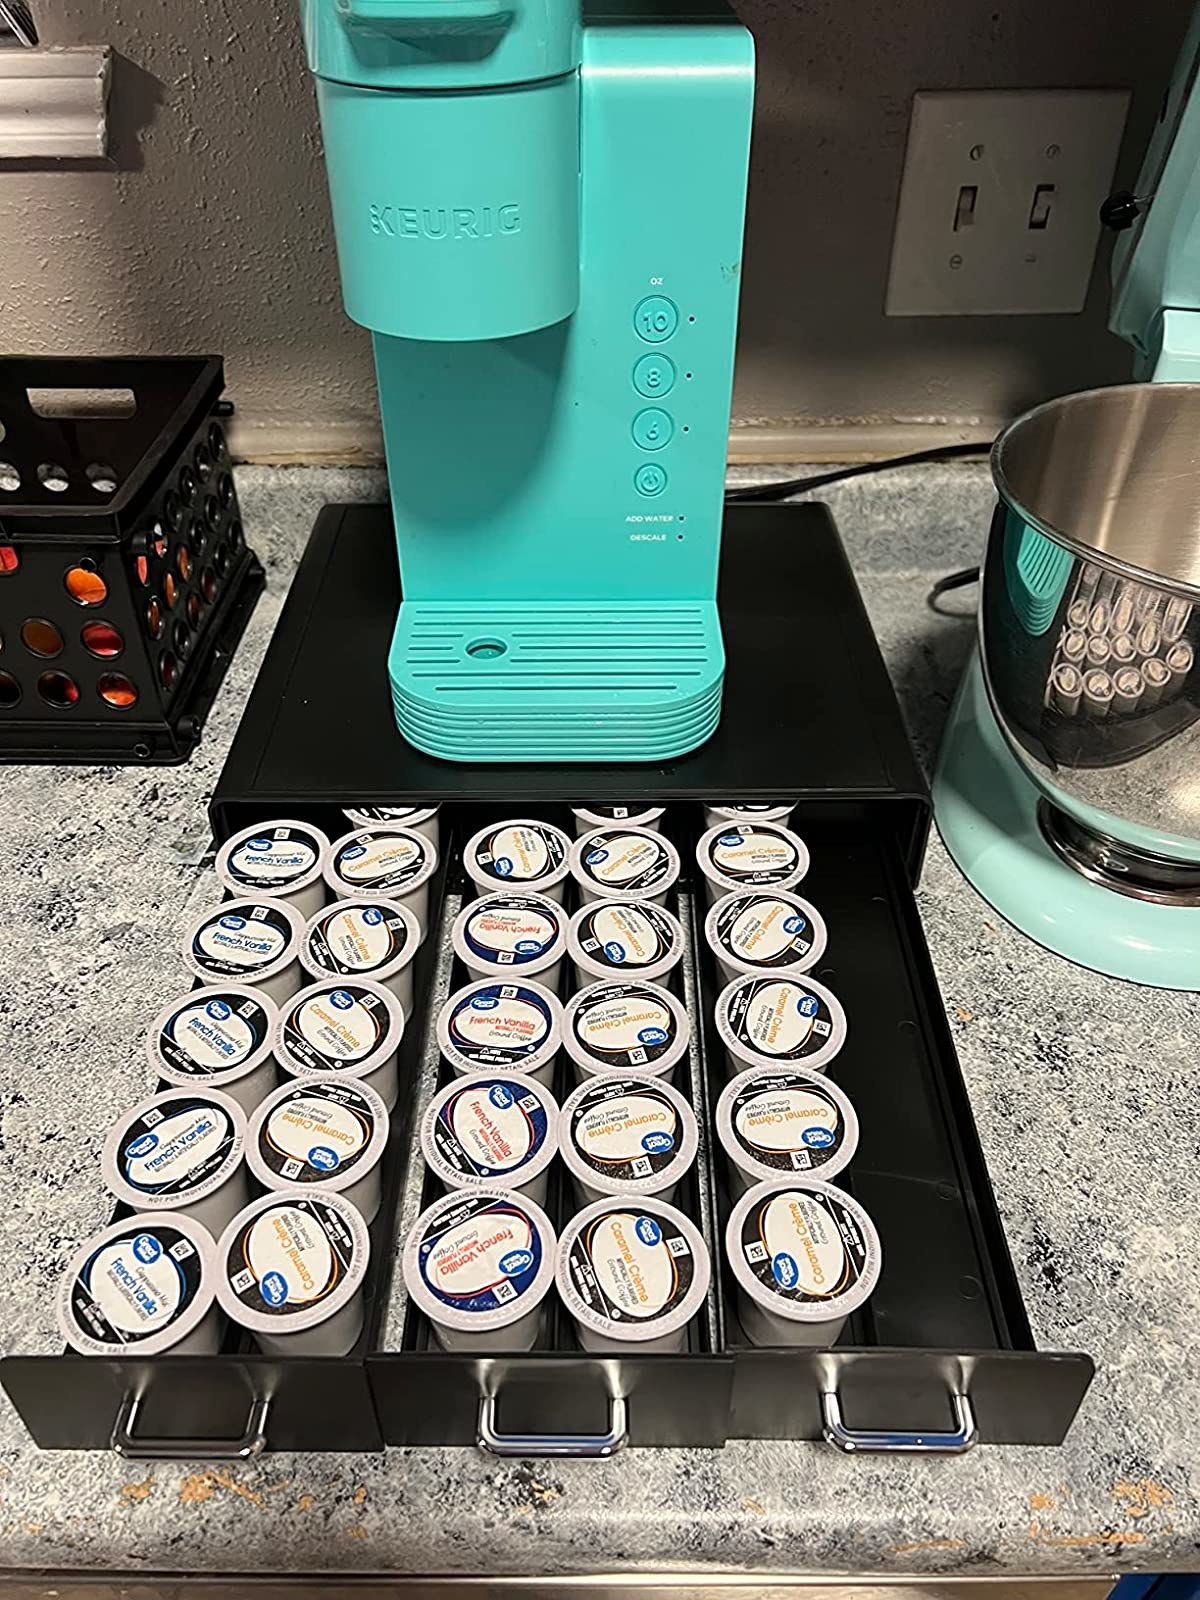 Reviewer image of drawers filled with K cups